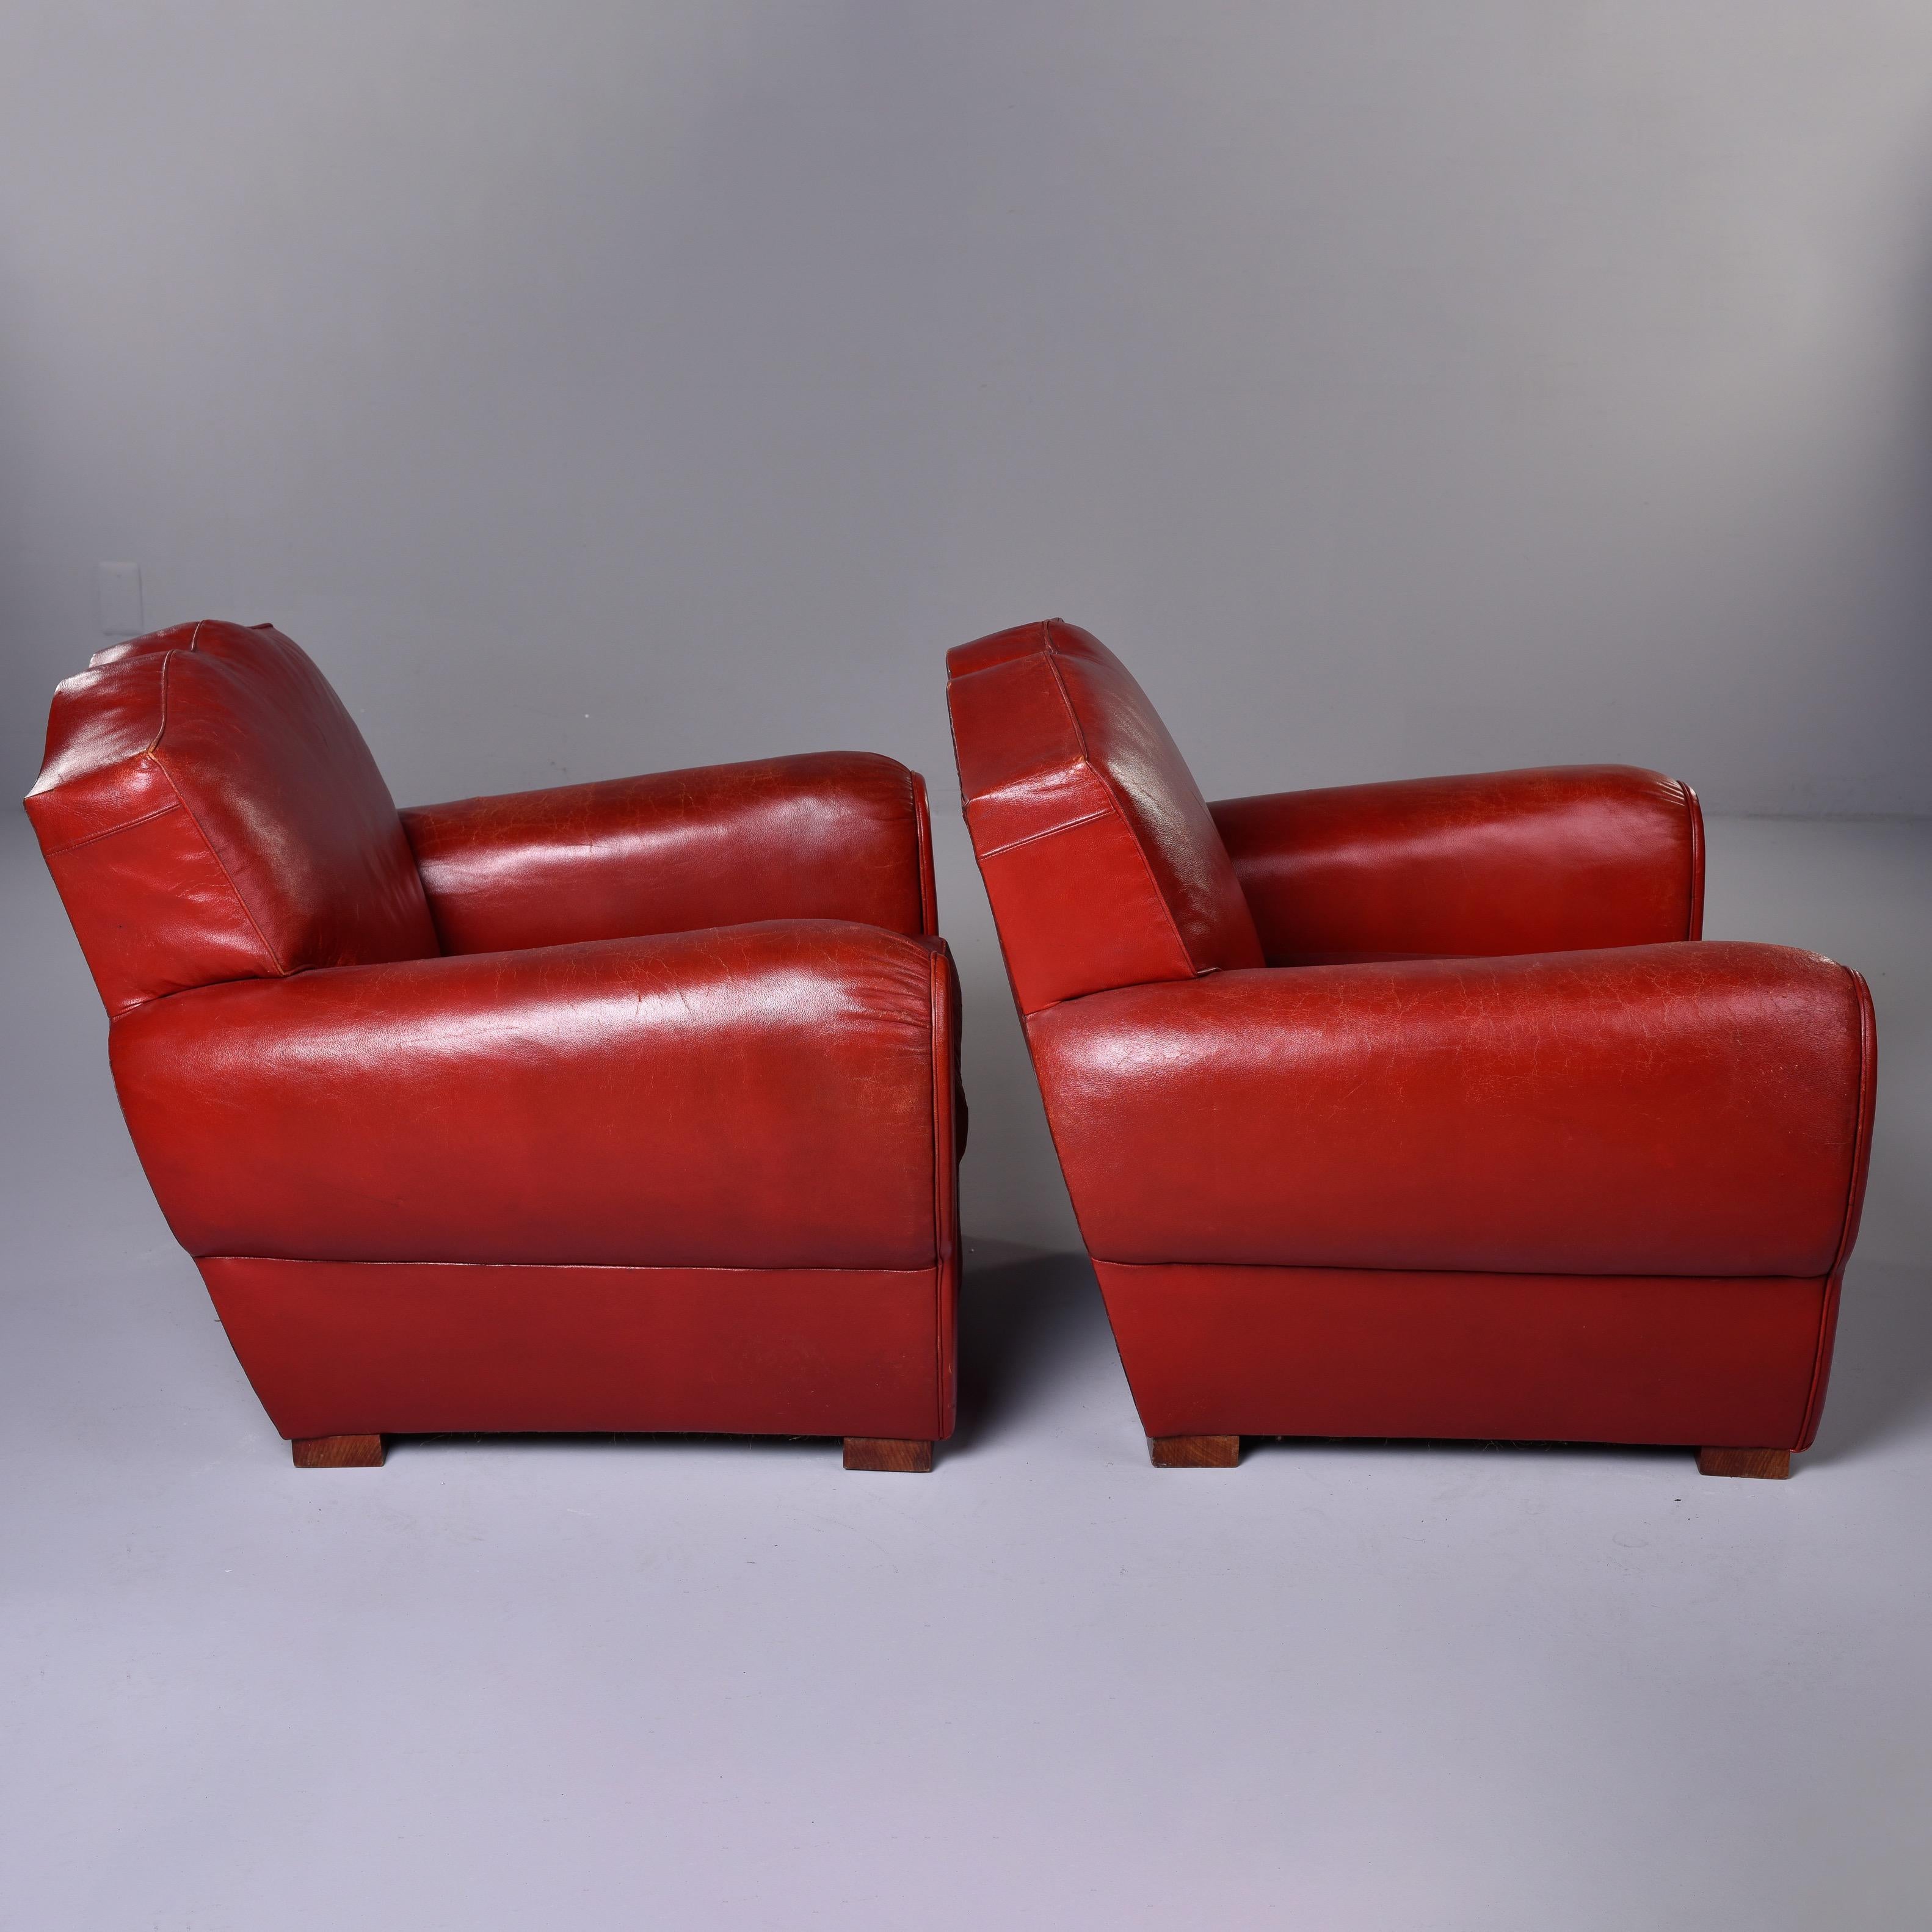 Pair of Vintage Art Deco Style Red Leather Club Chairs with Mustache Back 2